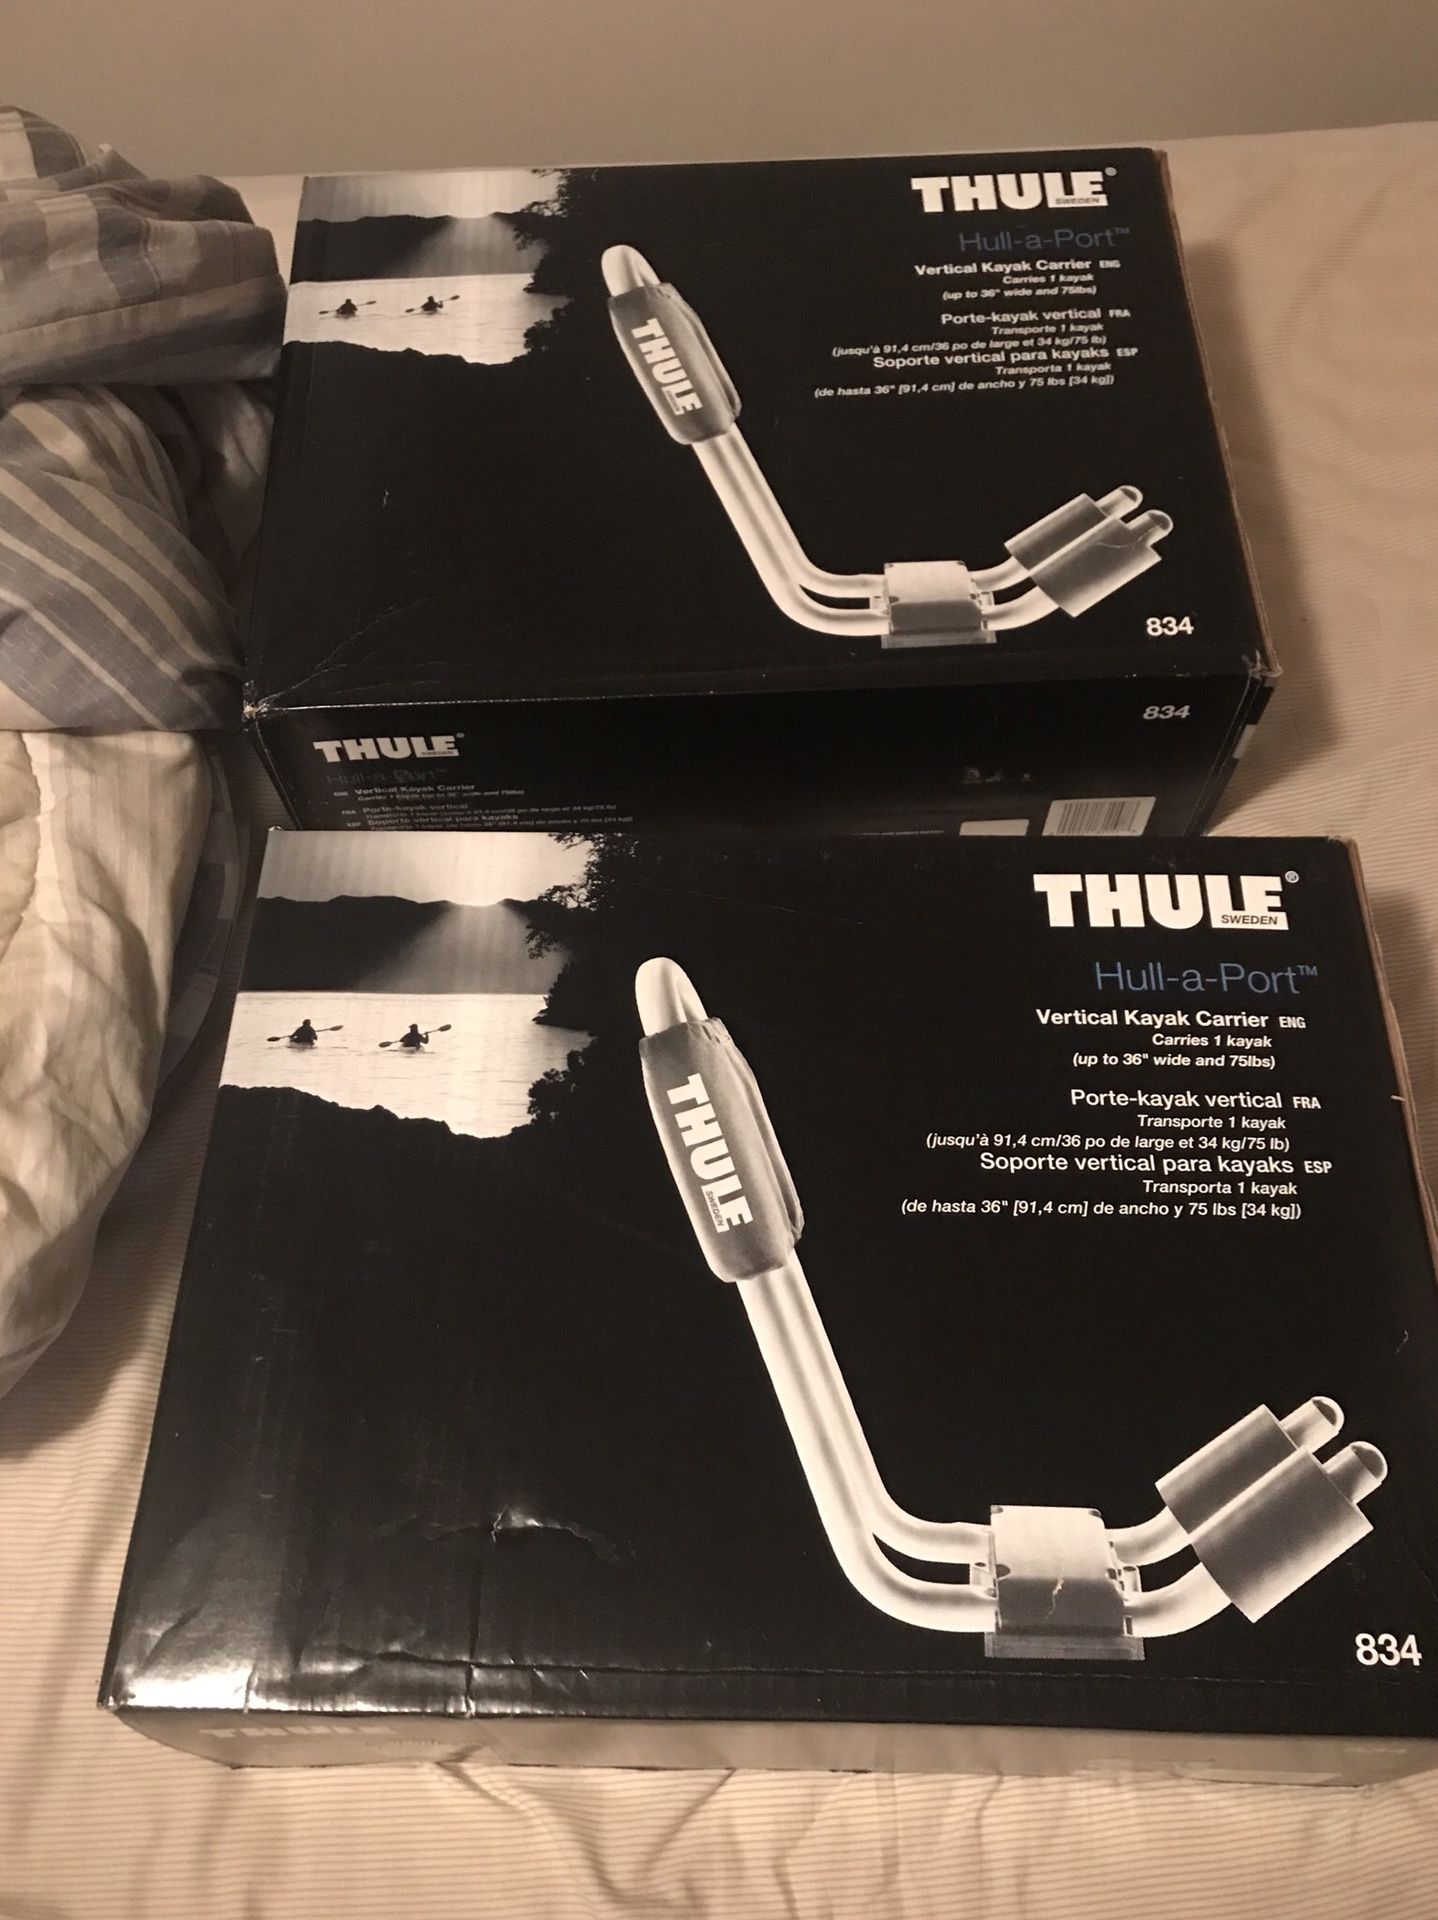 Thule Hull-a-Port Kayak Attachment